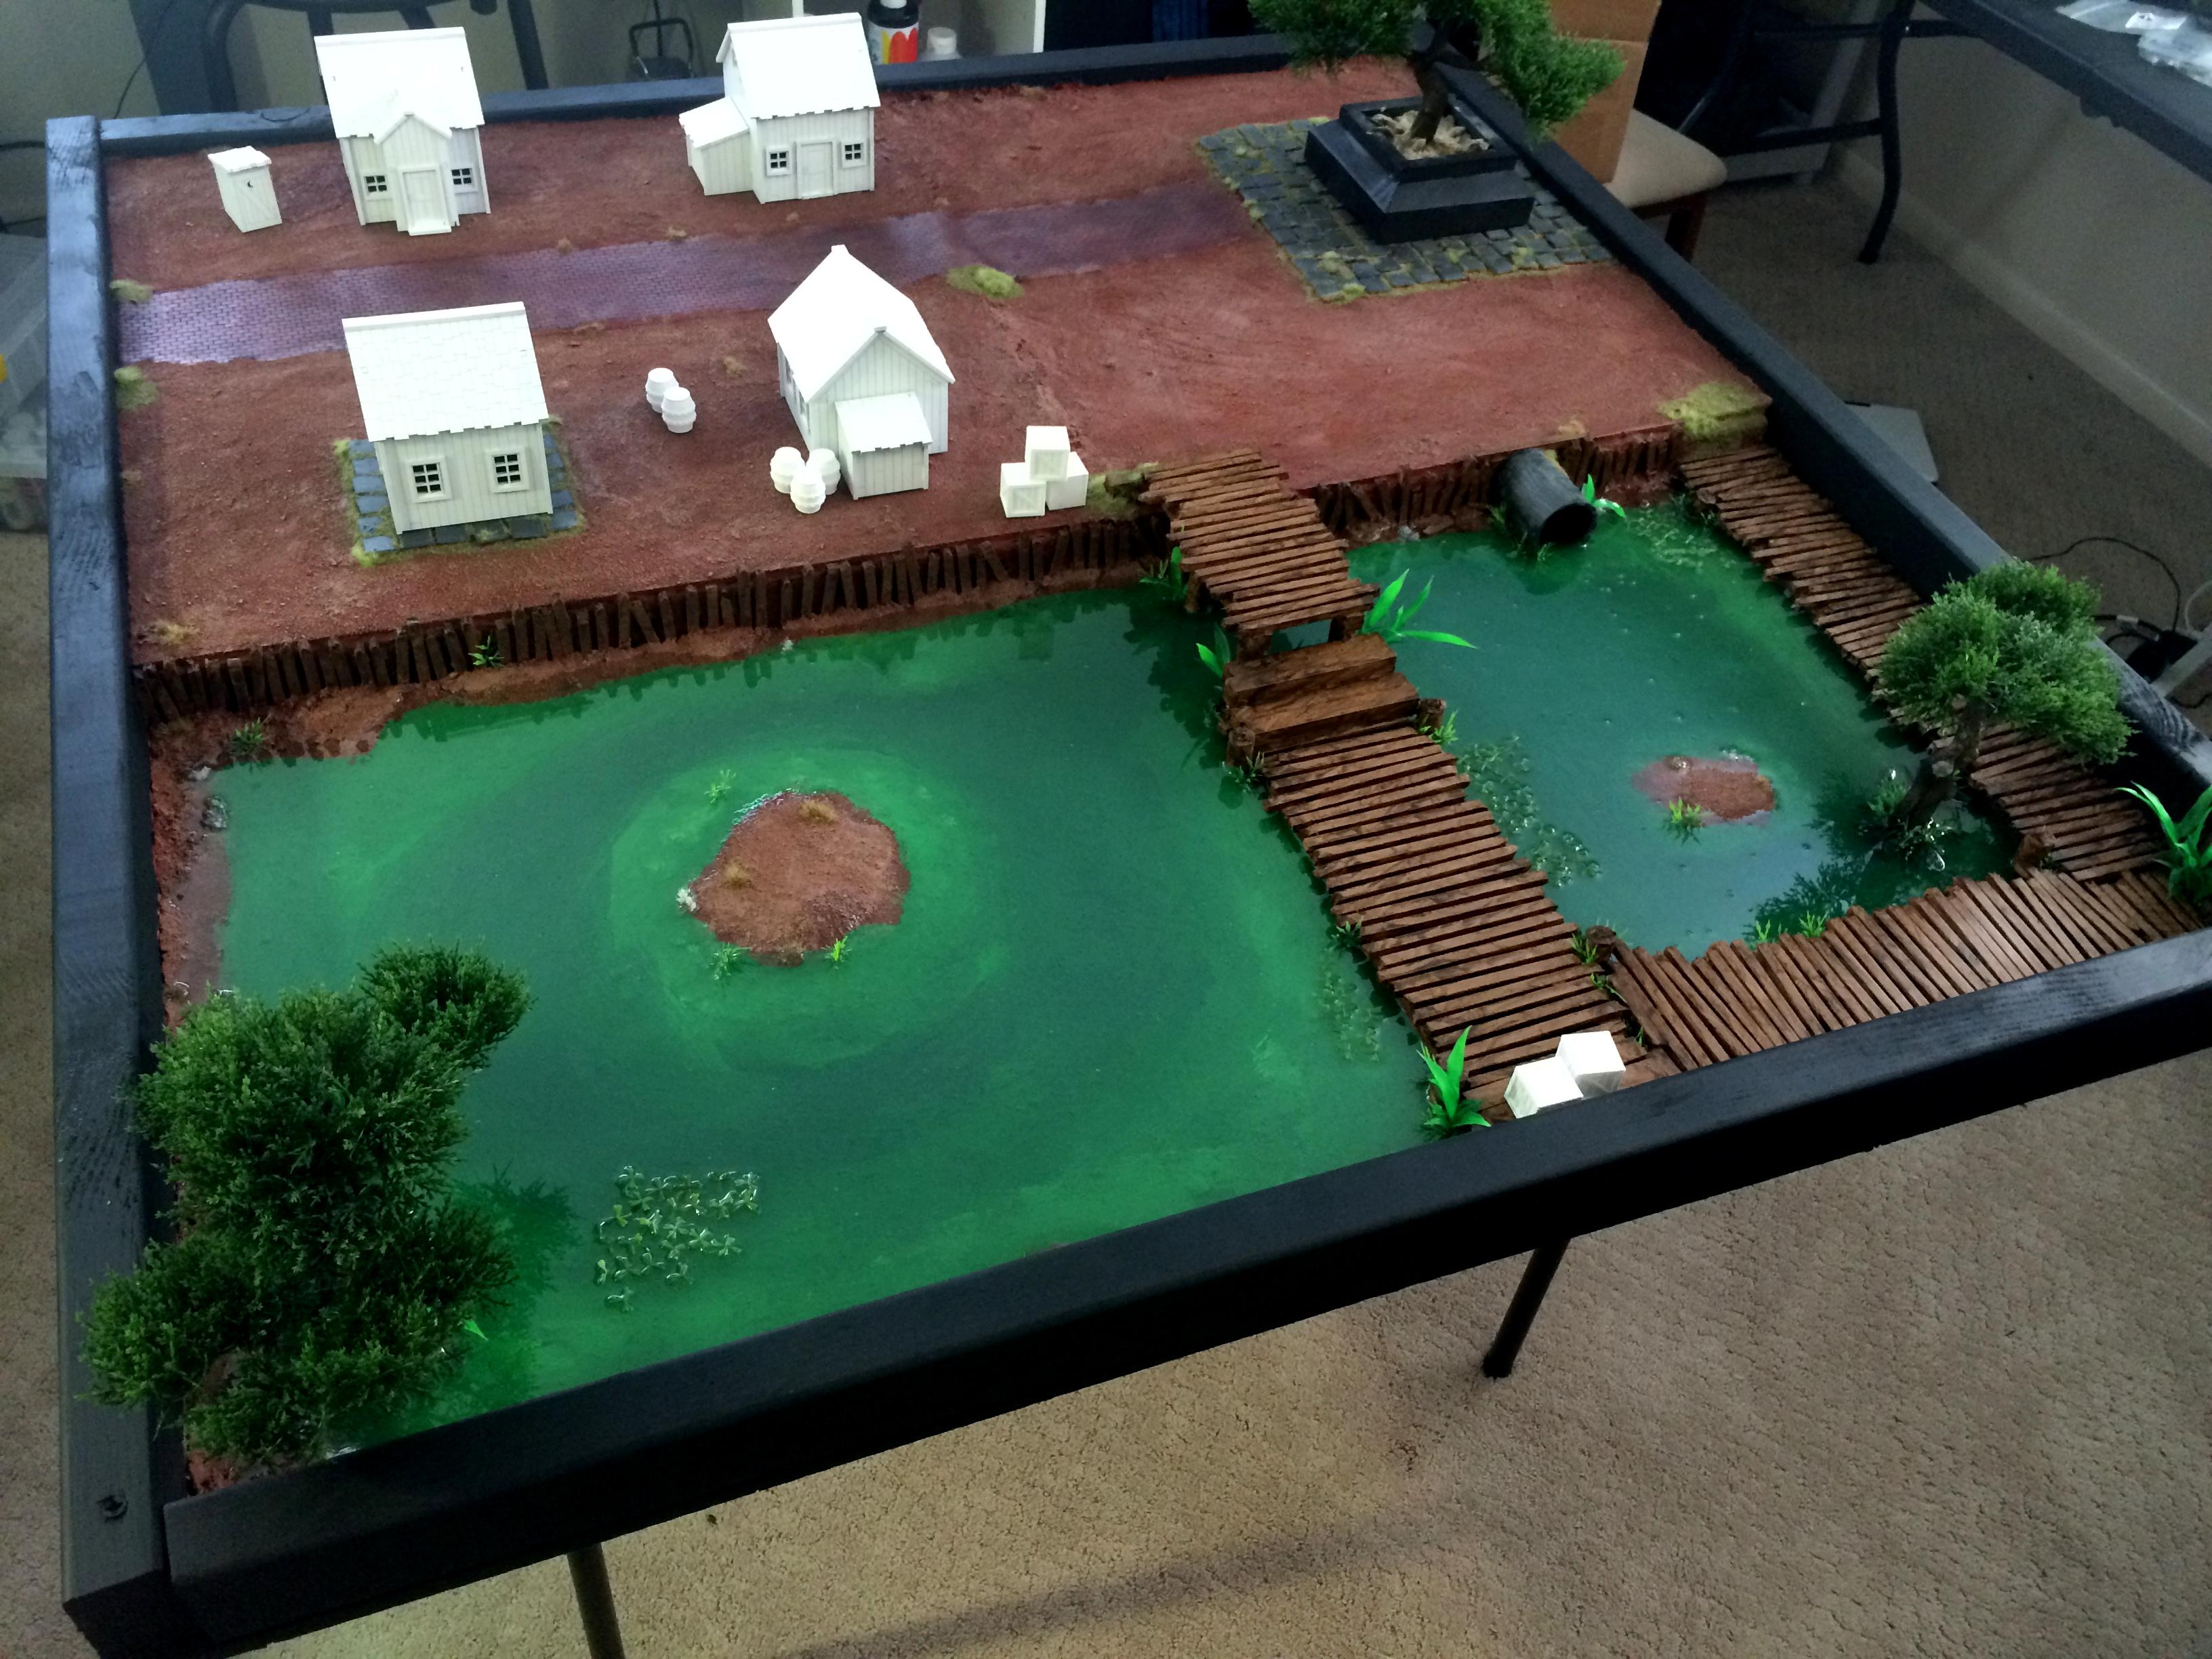 Board, Docks, Game Board, Game Table, Guild, Malifaux, Neverborn, Sunset, Swamp, Water, Western